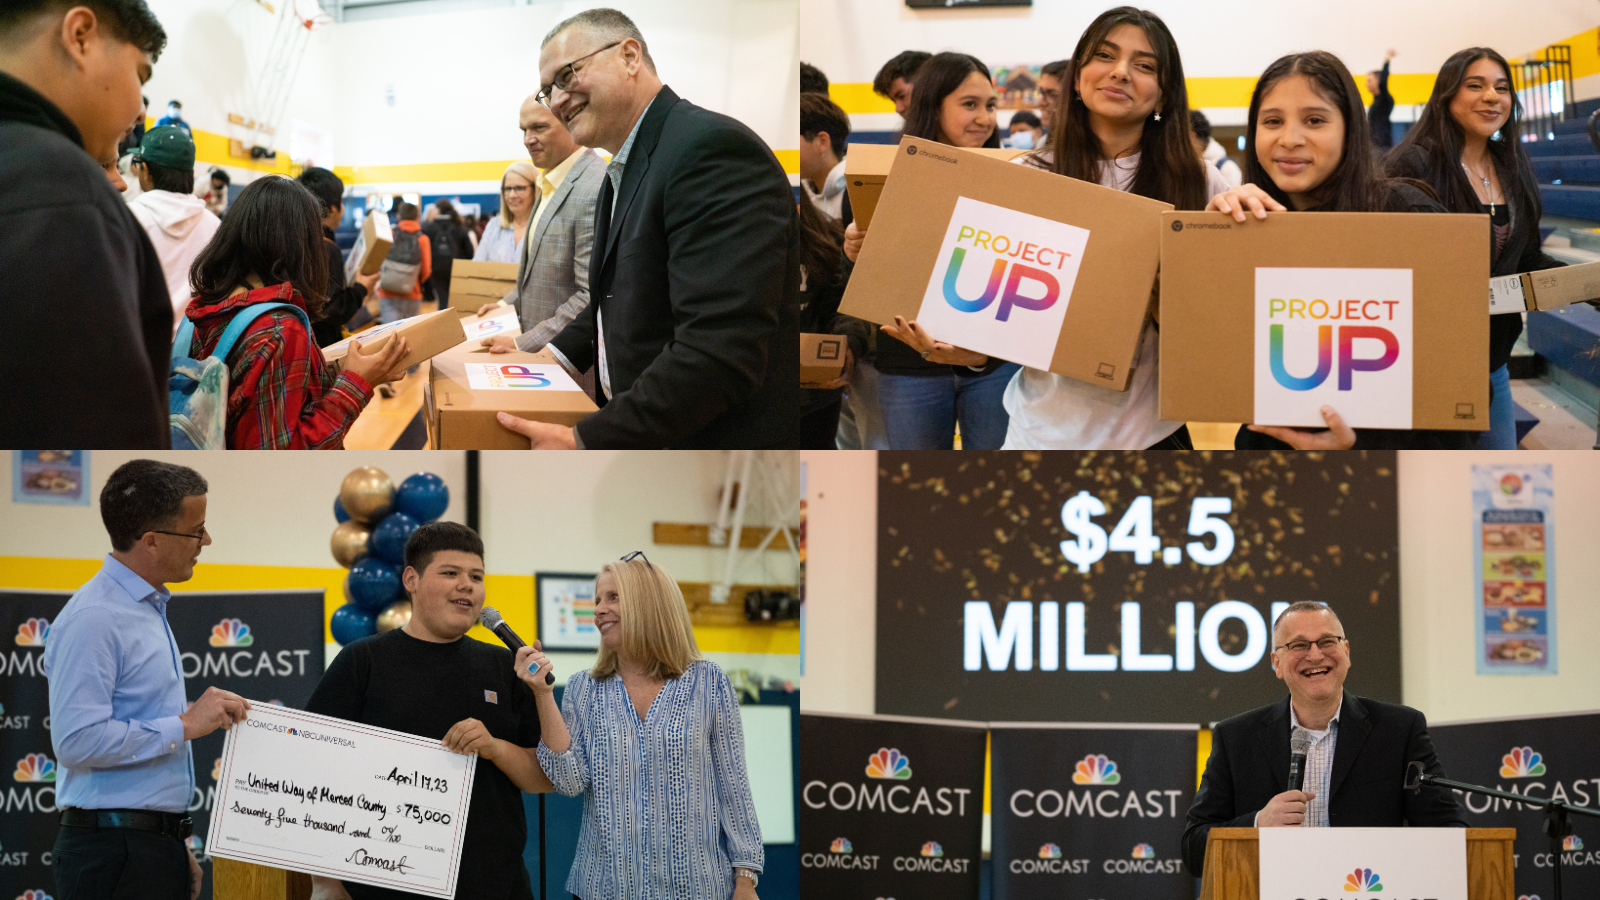 Comcast Invests $4.5 Million to Expand Its Xfinity 10G Network to Rural Community of Planada in Merced County, California